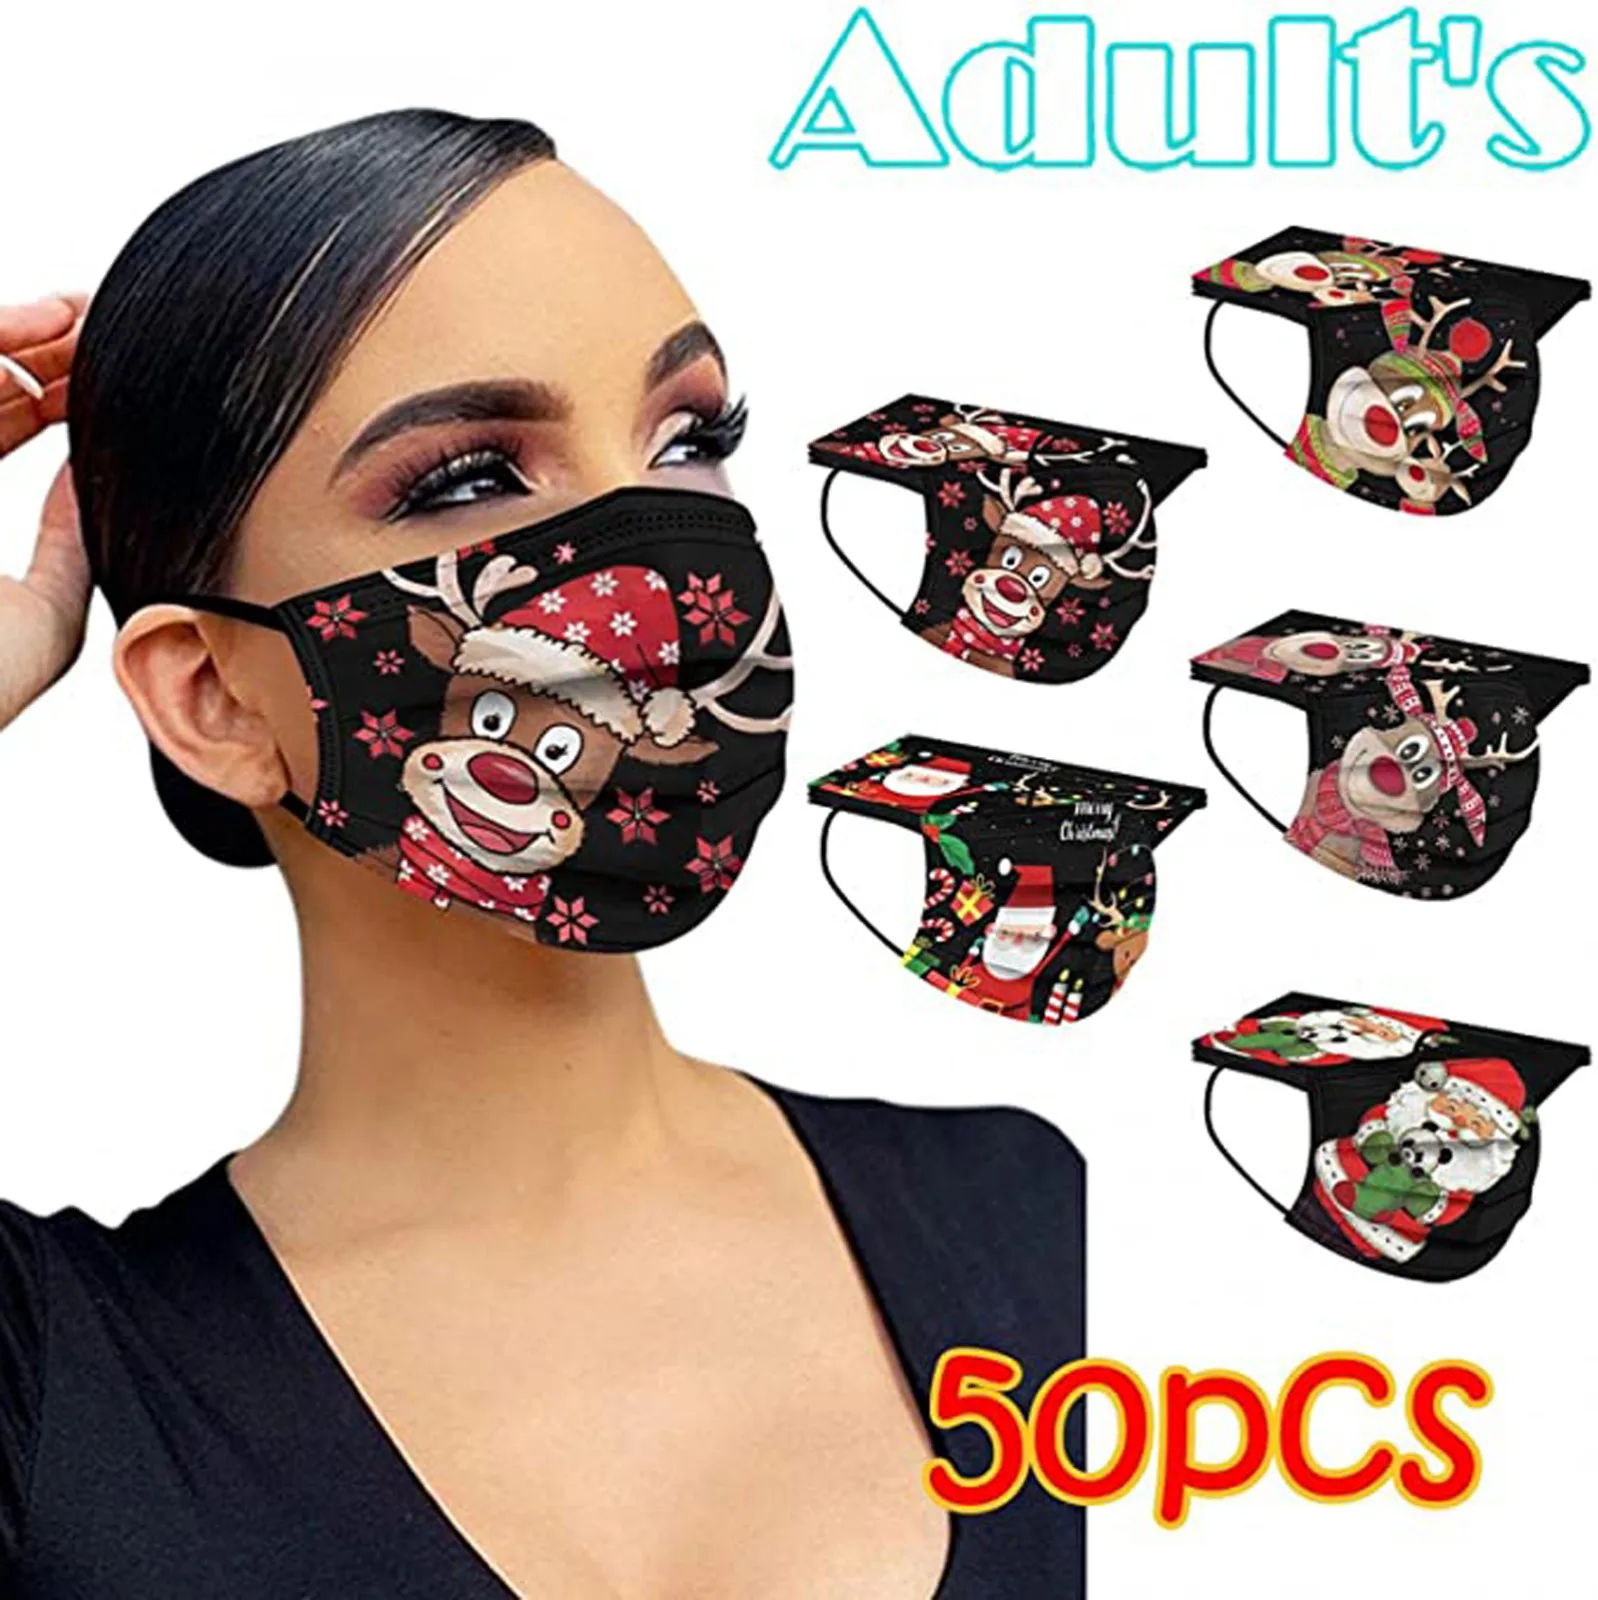 

50pcs Adult Disposable Mask mascarillas 3 Ply Mouthguard Pm2.5 Anti-dust Breathable Bandana Colourful Disposable Mouth Face Mask